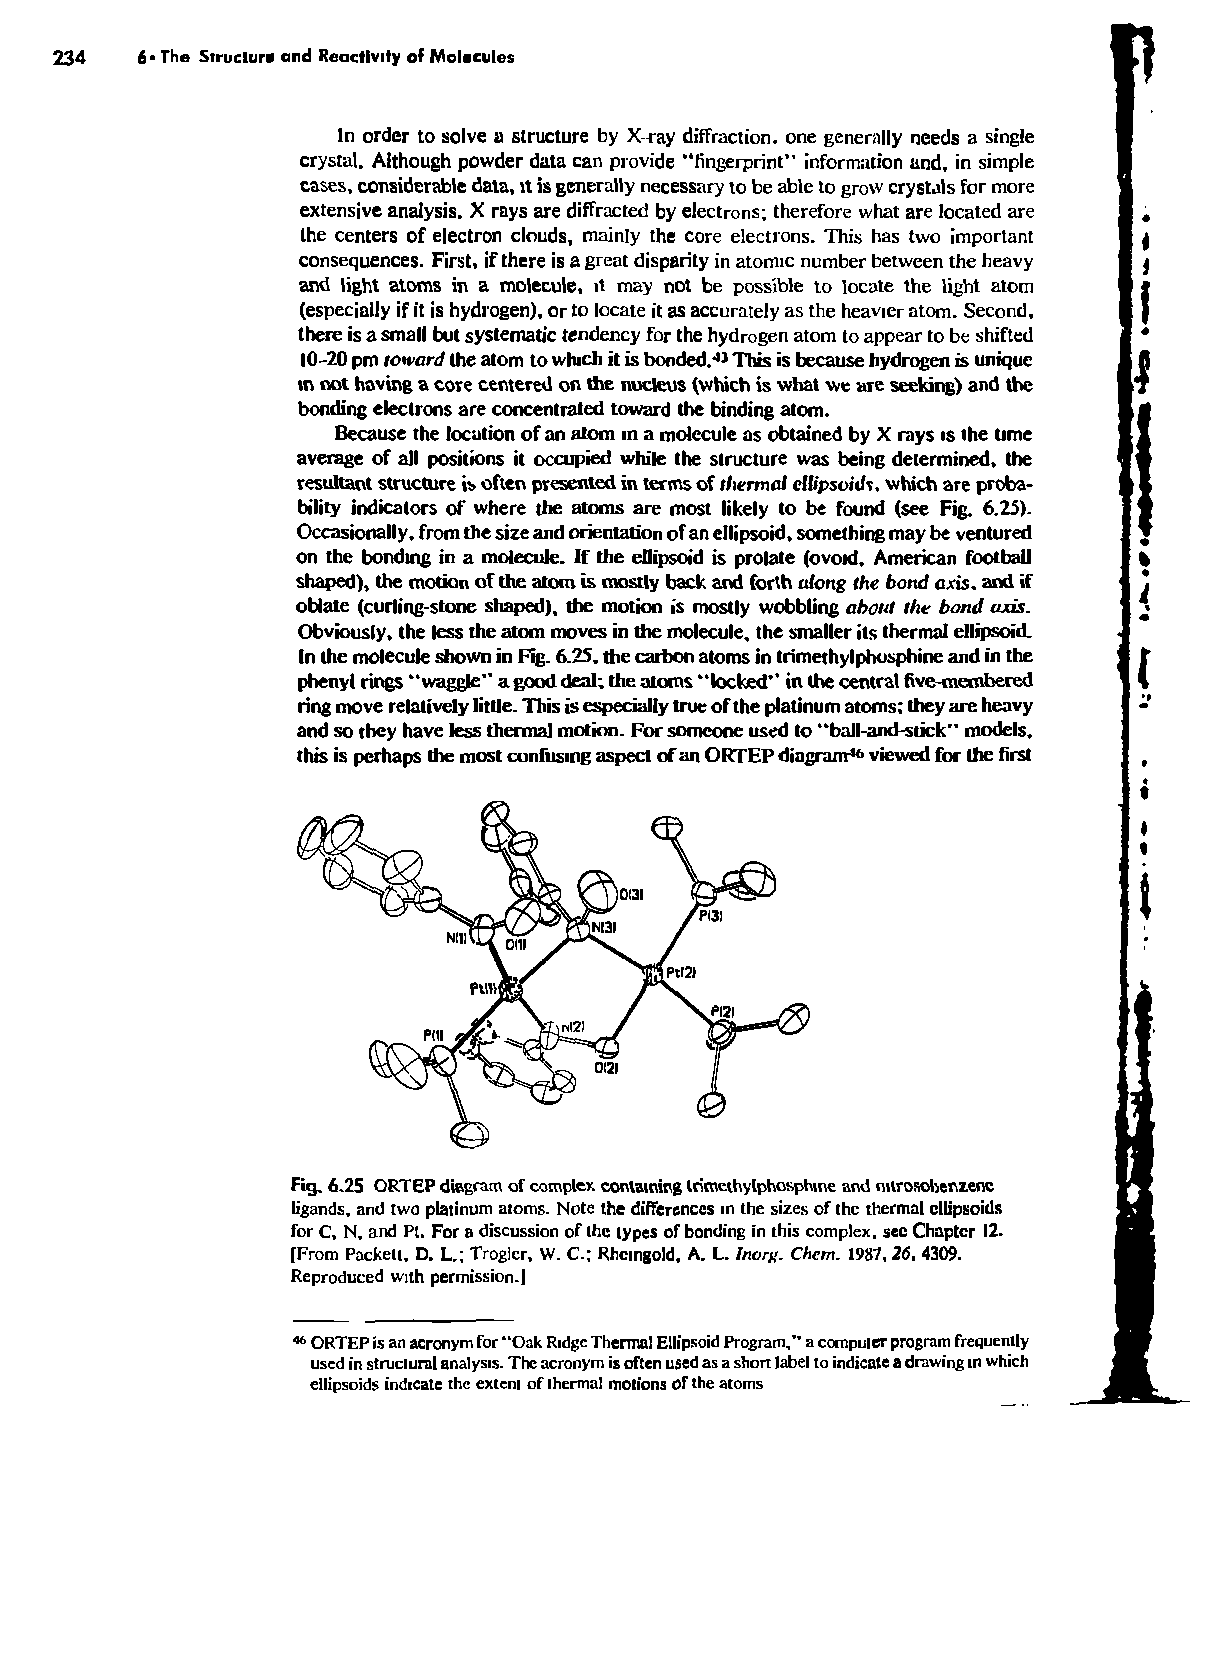 Fig. 6.25 ORTEP diagram of complex containing trimethylphosphine and ntirosohenzenc ligands, and two platinum atoms. Note the differences in the sizes of the thermal ellipsoids for C, N. and Pt. For a discussion of the types of bonding in this complex, sec Chapter 12. [From Packeli, D. L, Troglcr, W. C. Rhcingold, A. L. Inory. Chcm. IPS , 26, 4309. Reproduced with permission. ...